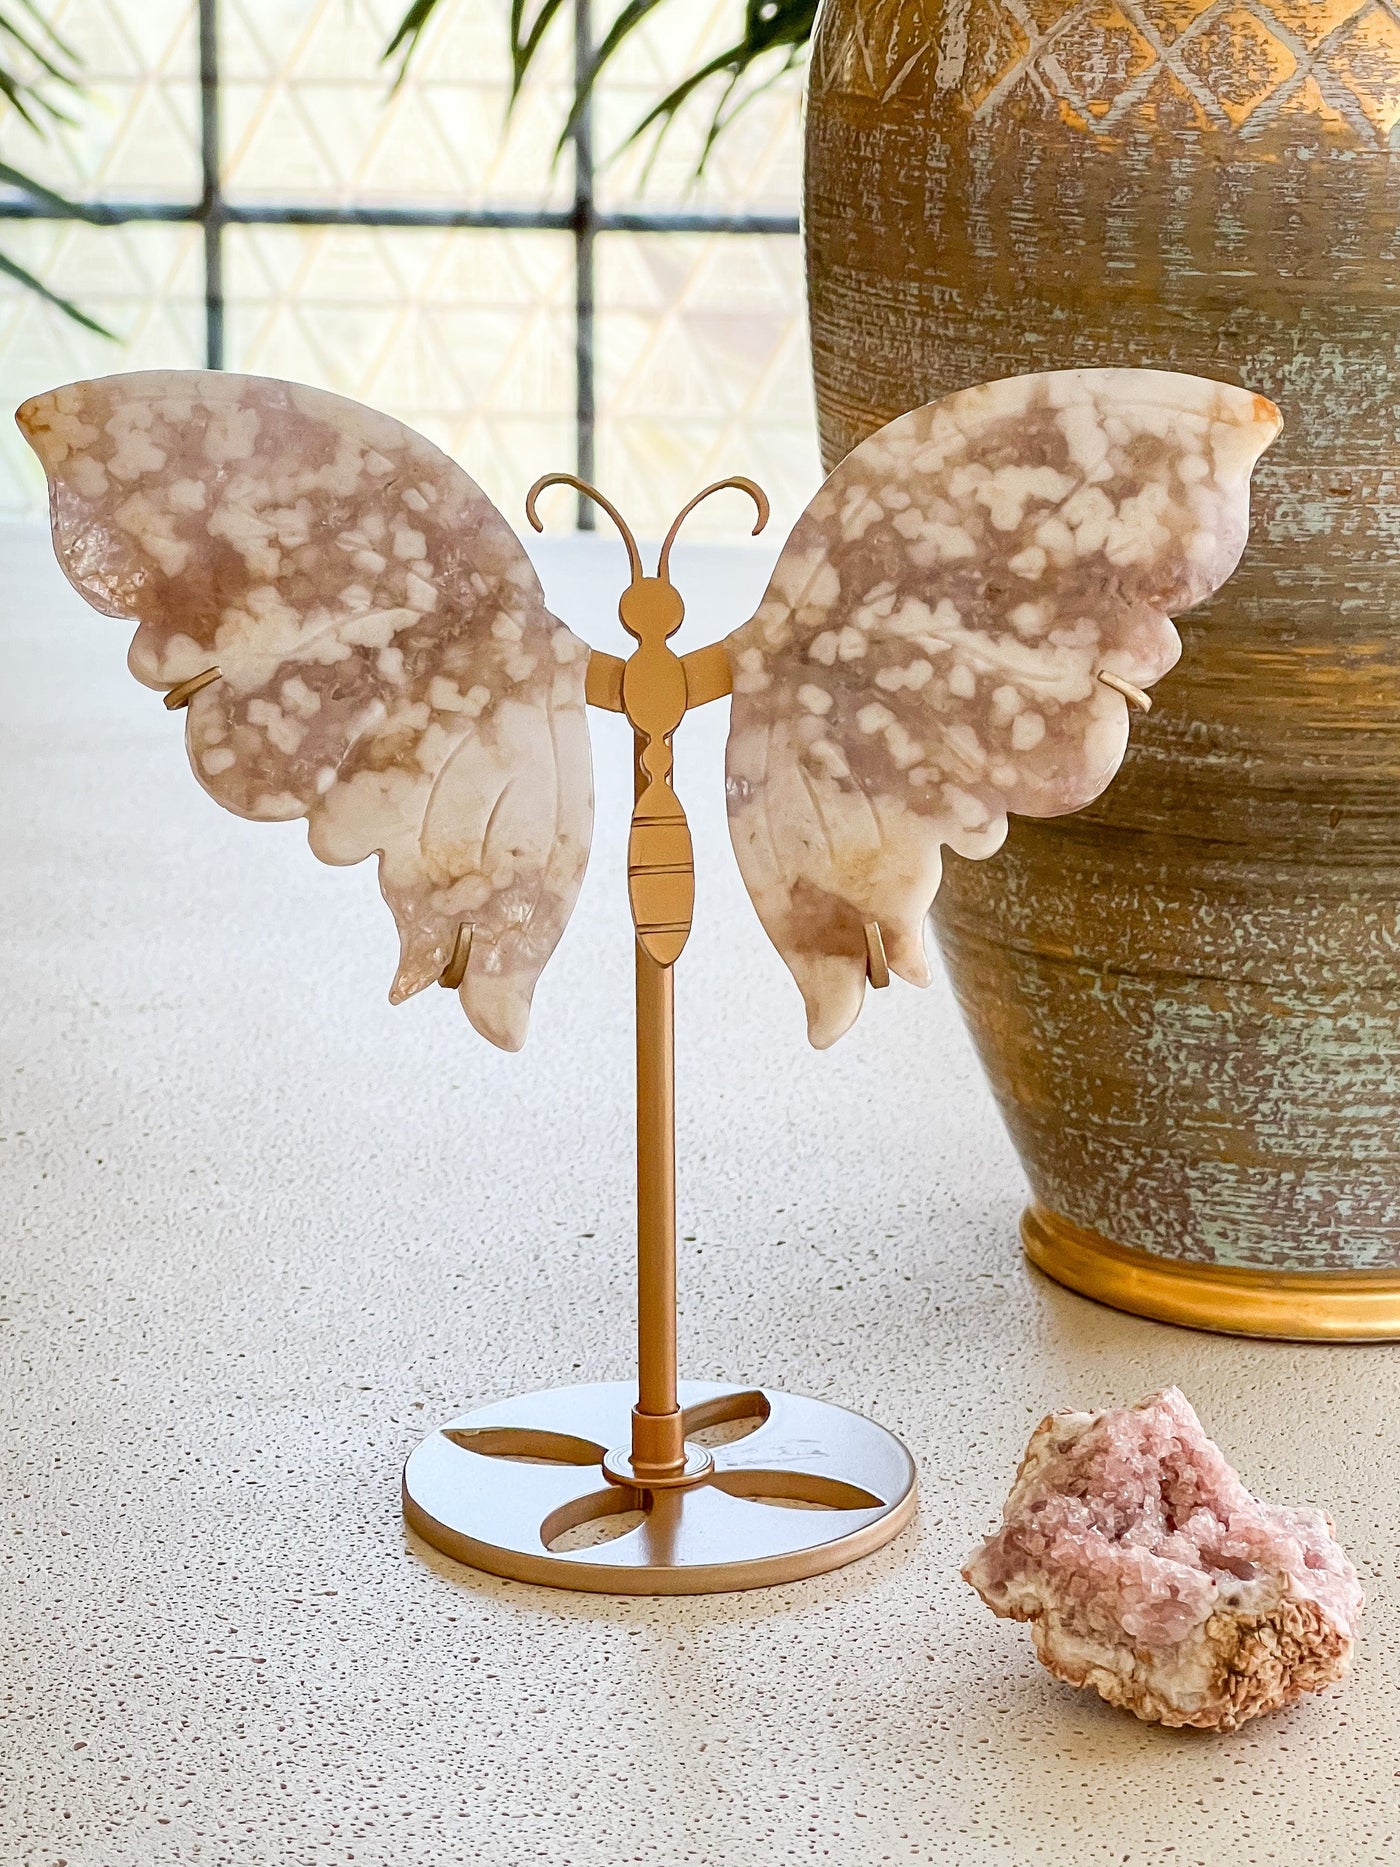 PINK AMETHYST WITH FLOWER AGATE BUTTERFLY WINGS ON STAND (SMALL) Revive In Style Vintage Furniture Painted Refinished Redesign Beautiful One of a Kind Artistic Antique Unique Home Decor Interior Design French Country Shabby Chic Cottage Farmhouse Grandmillenial Coastal Chalk Paint Metallic Glam Eclectic Quality Dovetailed Rustic Furniture Painter Pinterest Bedroom Living Room Entryway Kitchen Home Trends House Styles Decorating ideas